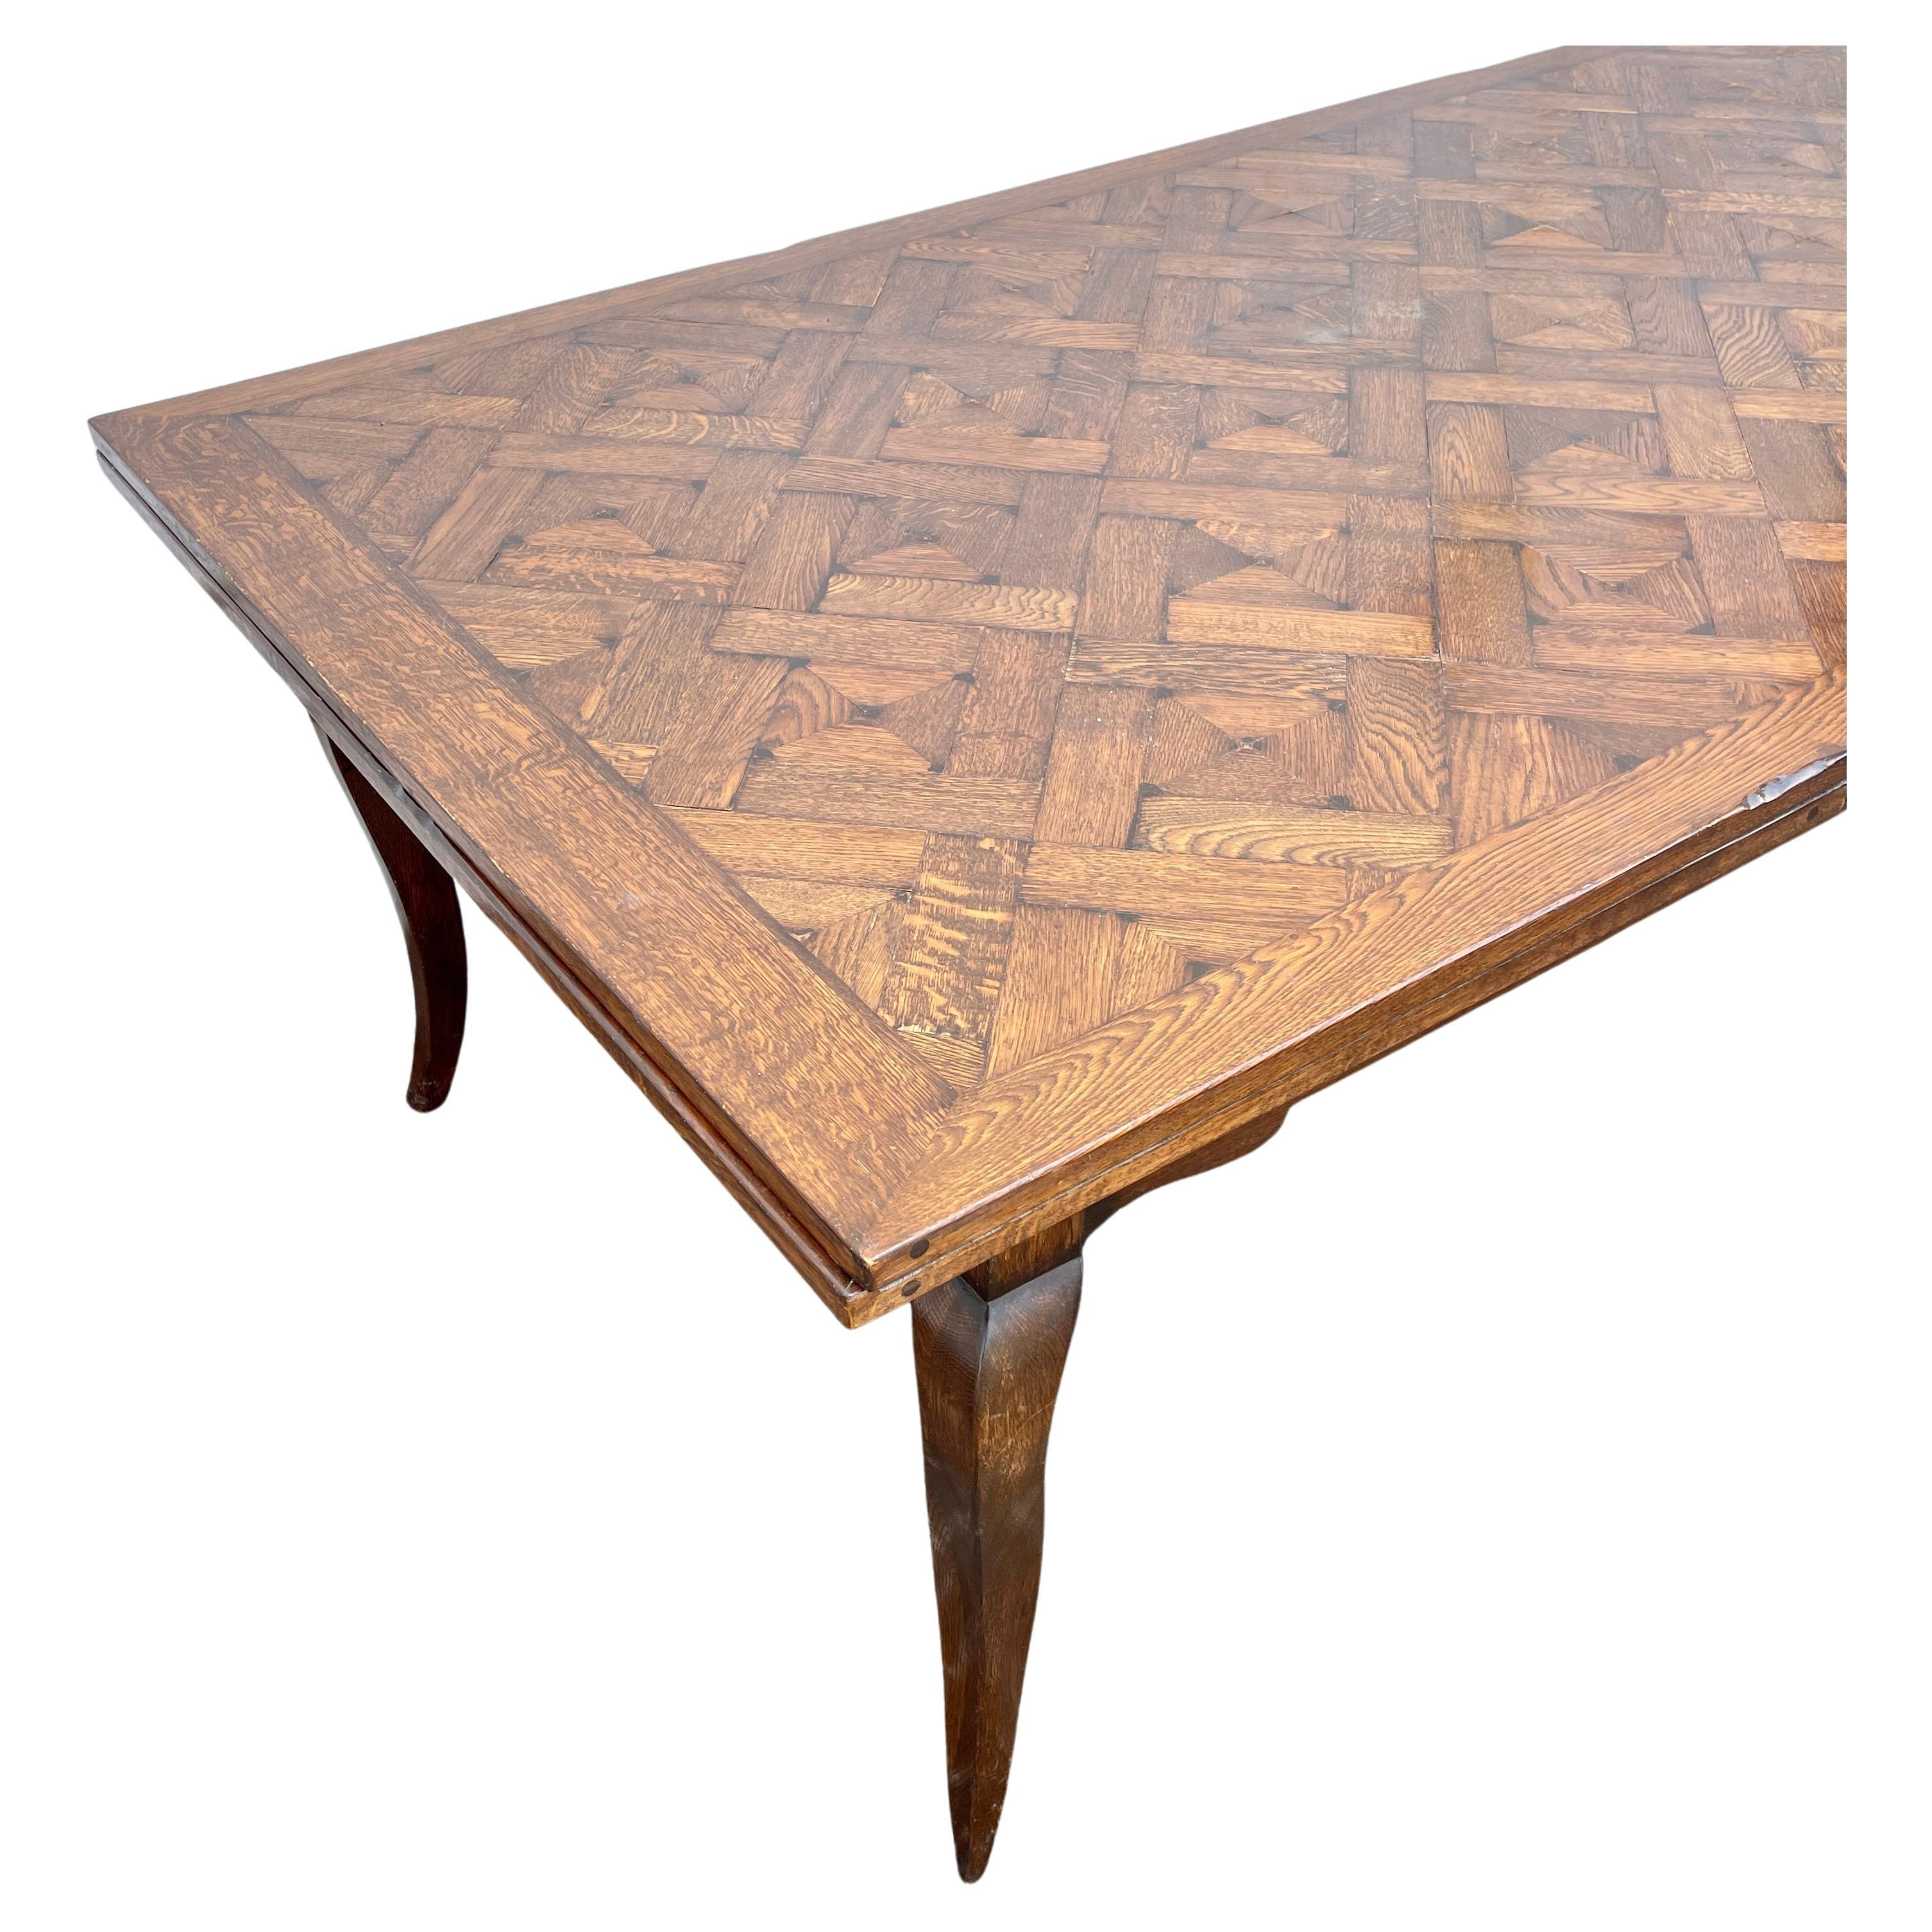 French Provincial Long French Country Provincial Parquet Top Extension Farm Table